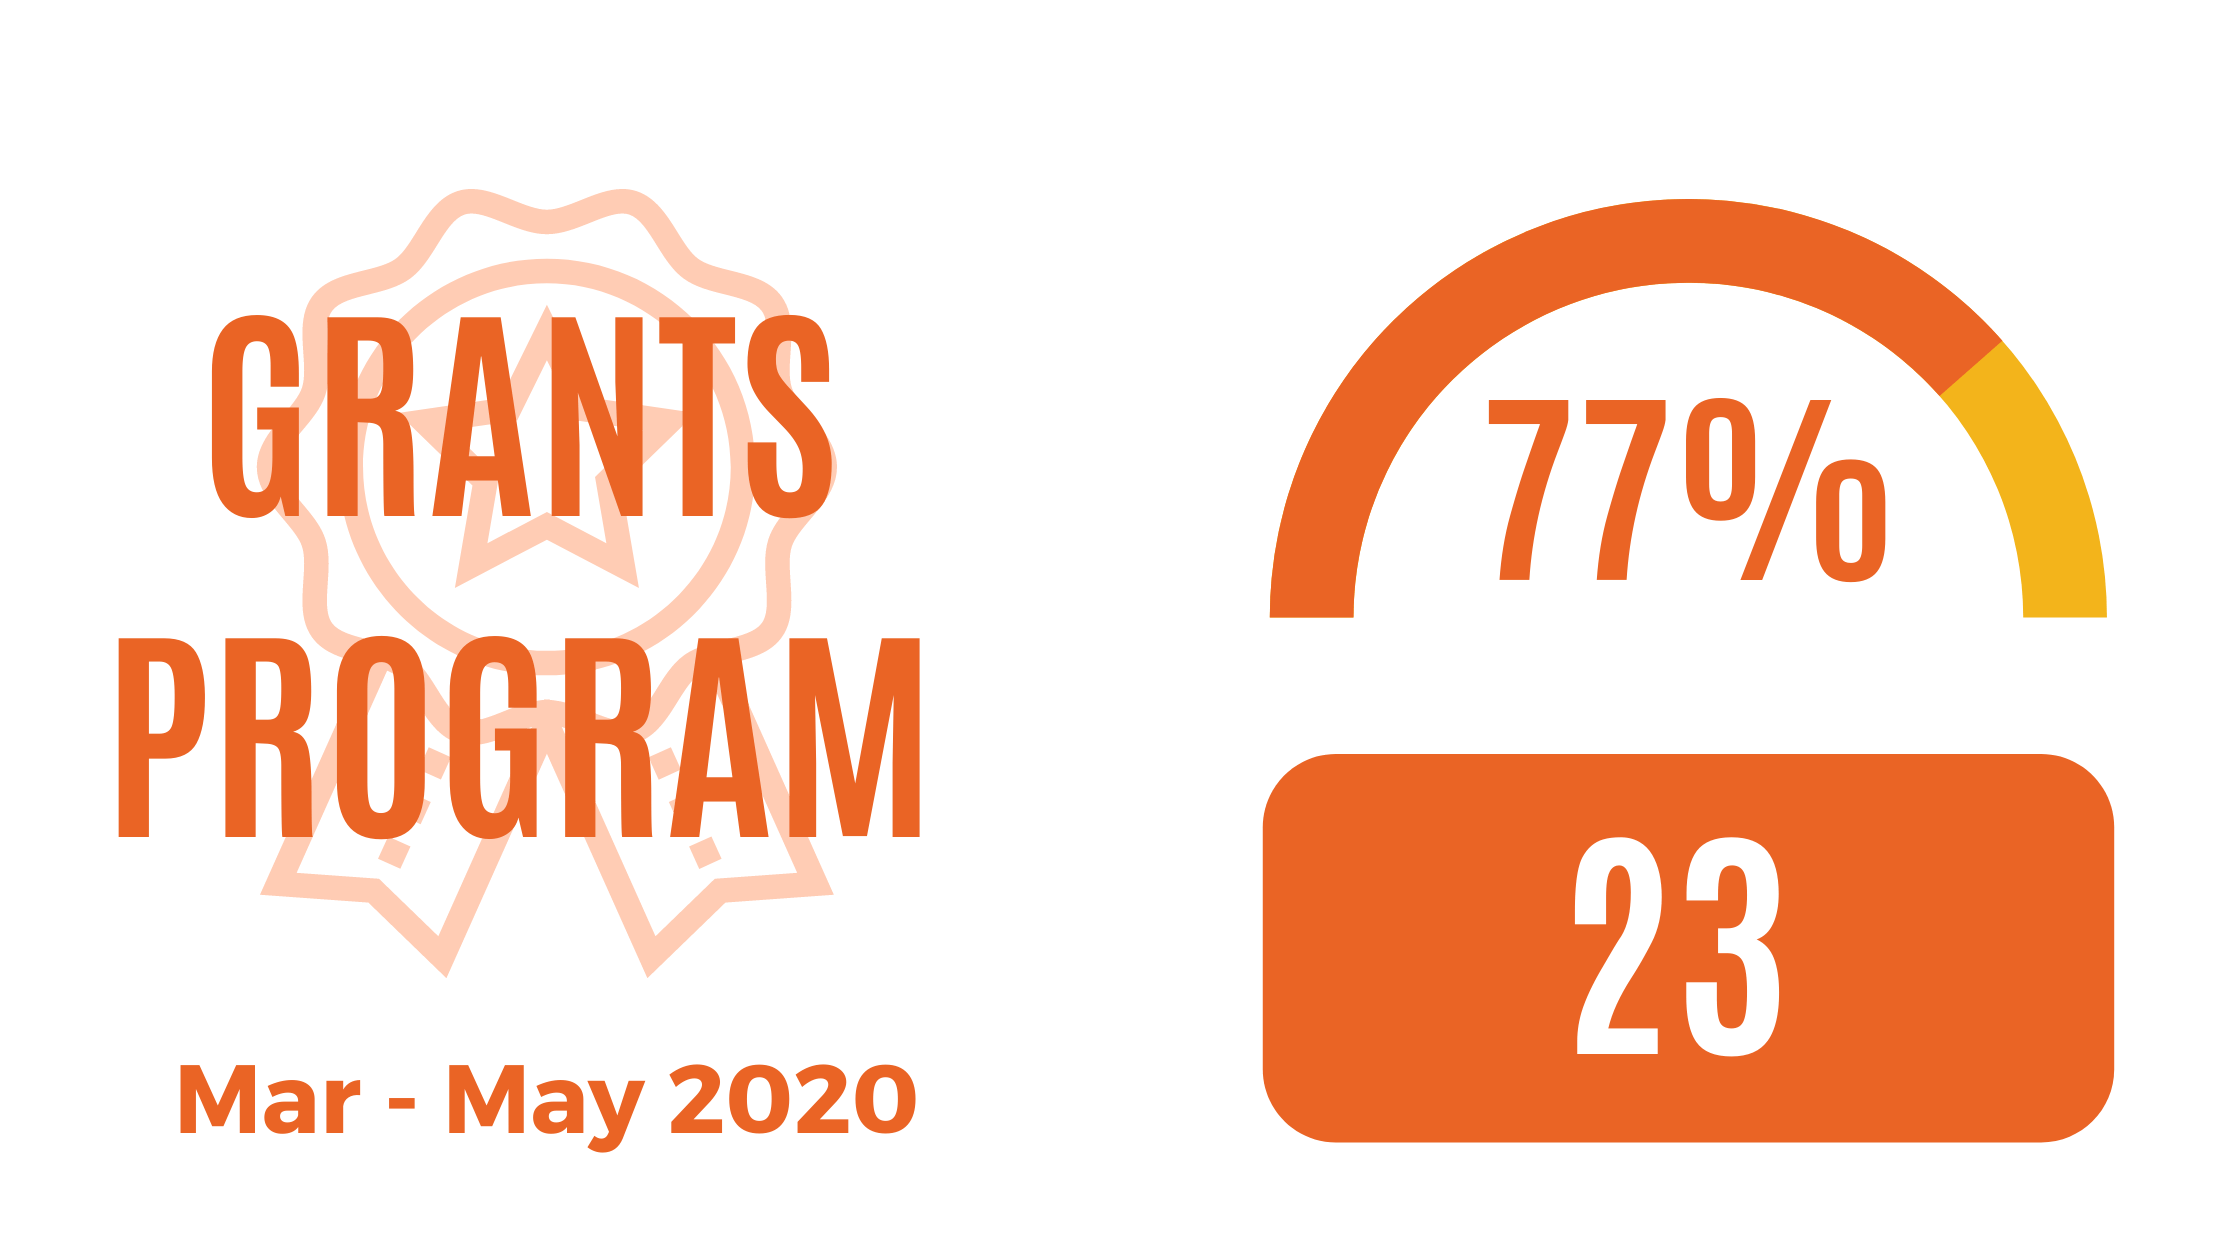 Grants Program - March to May 2020